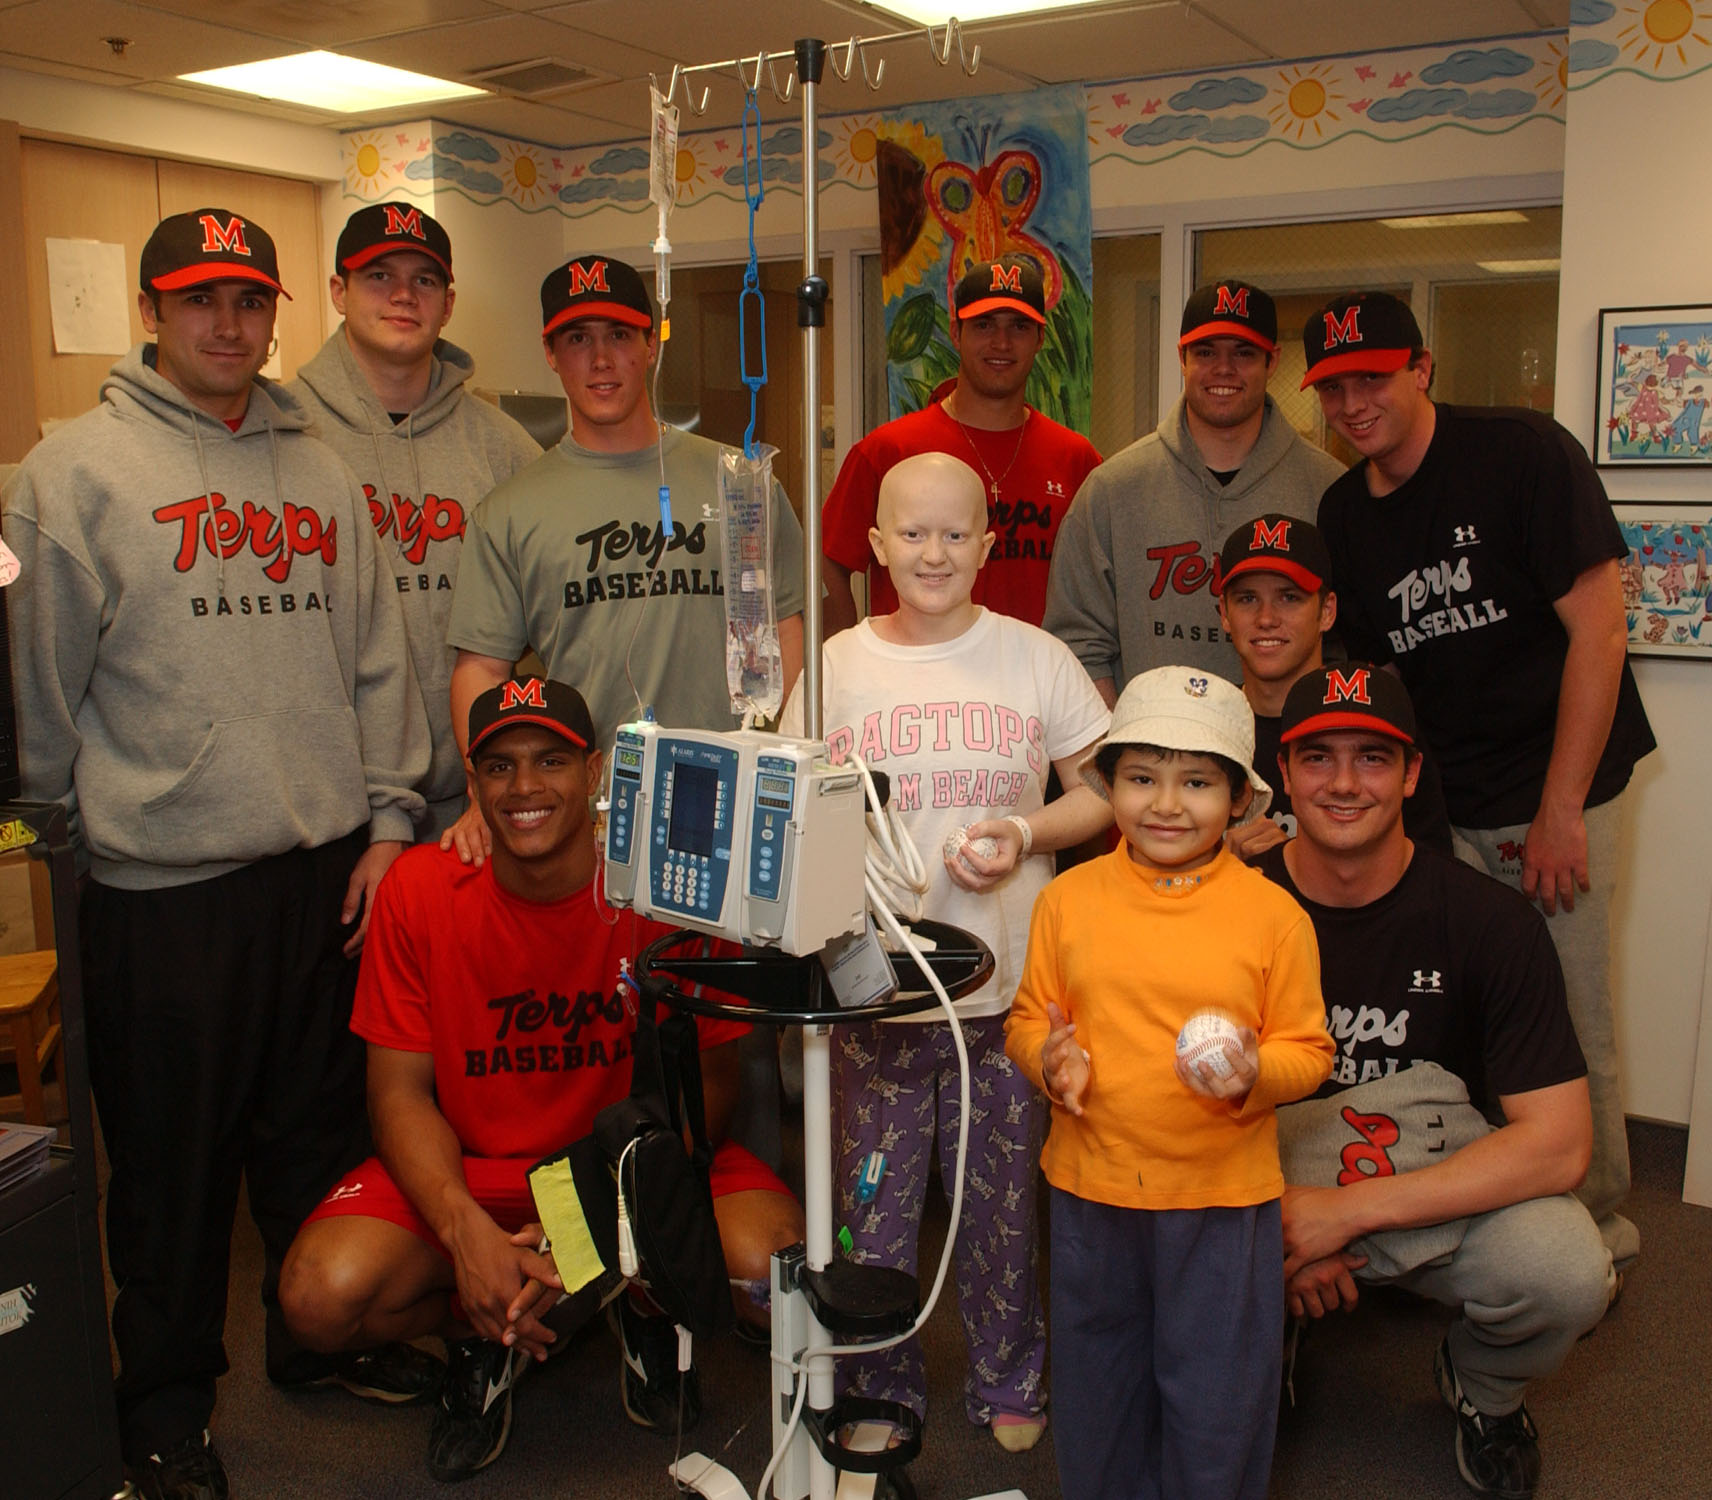 The Maryland Terrapins baseball team with pediatric patients Amy Knopfmacher (left) and Valeria Rivero, on one of their CC visits.